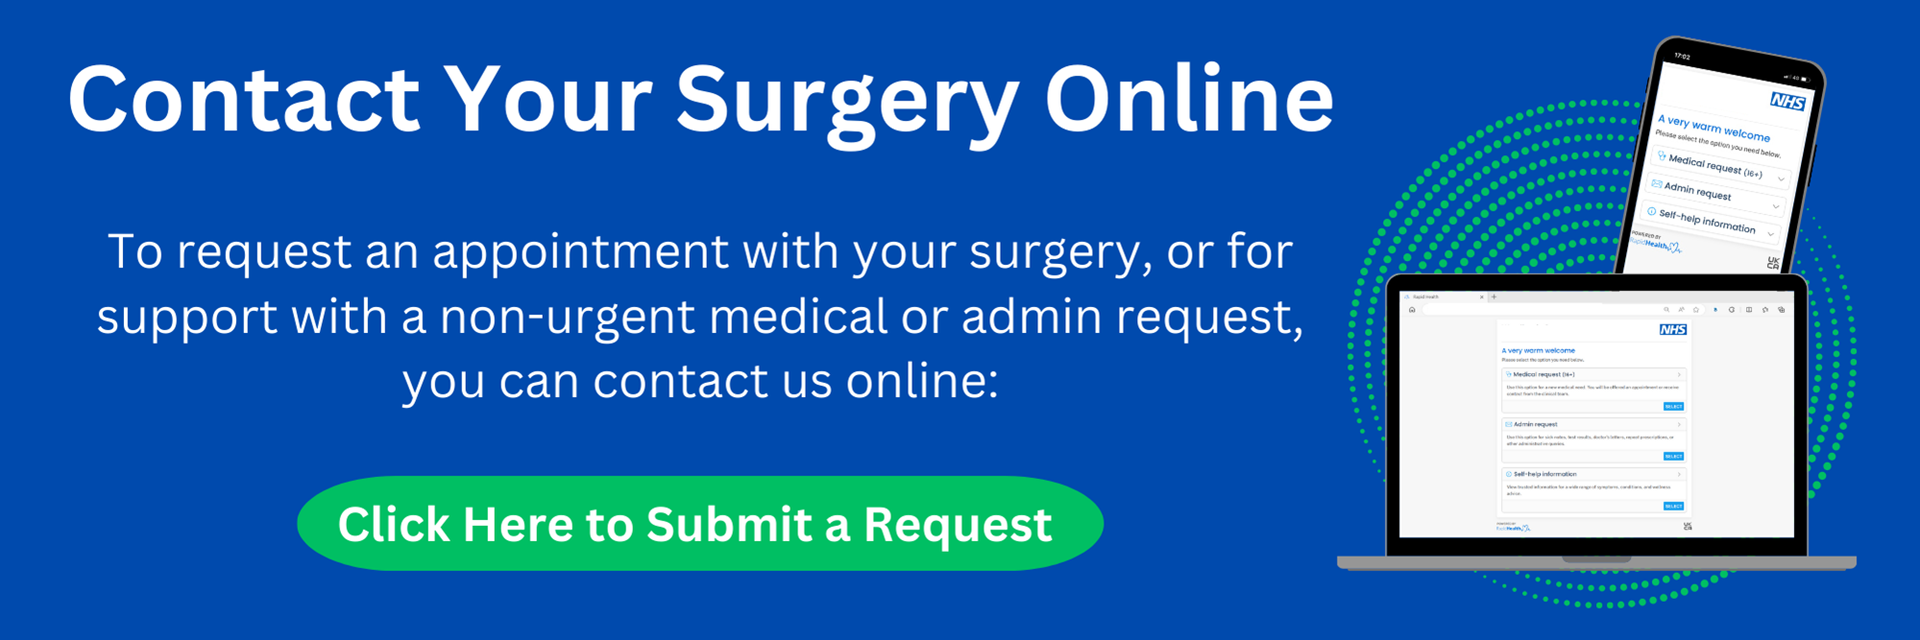 Contact Your Surgery Online